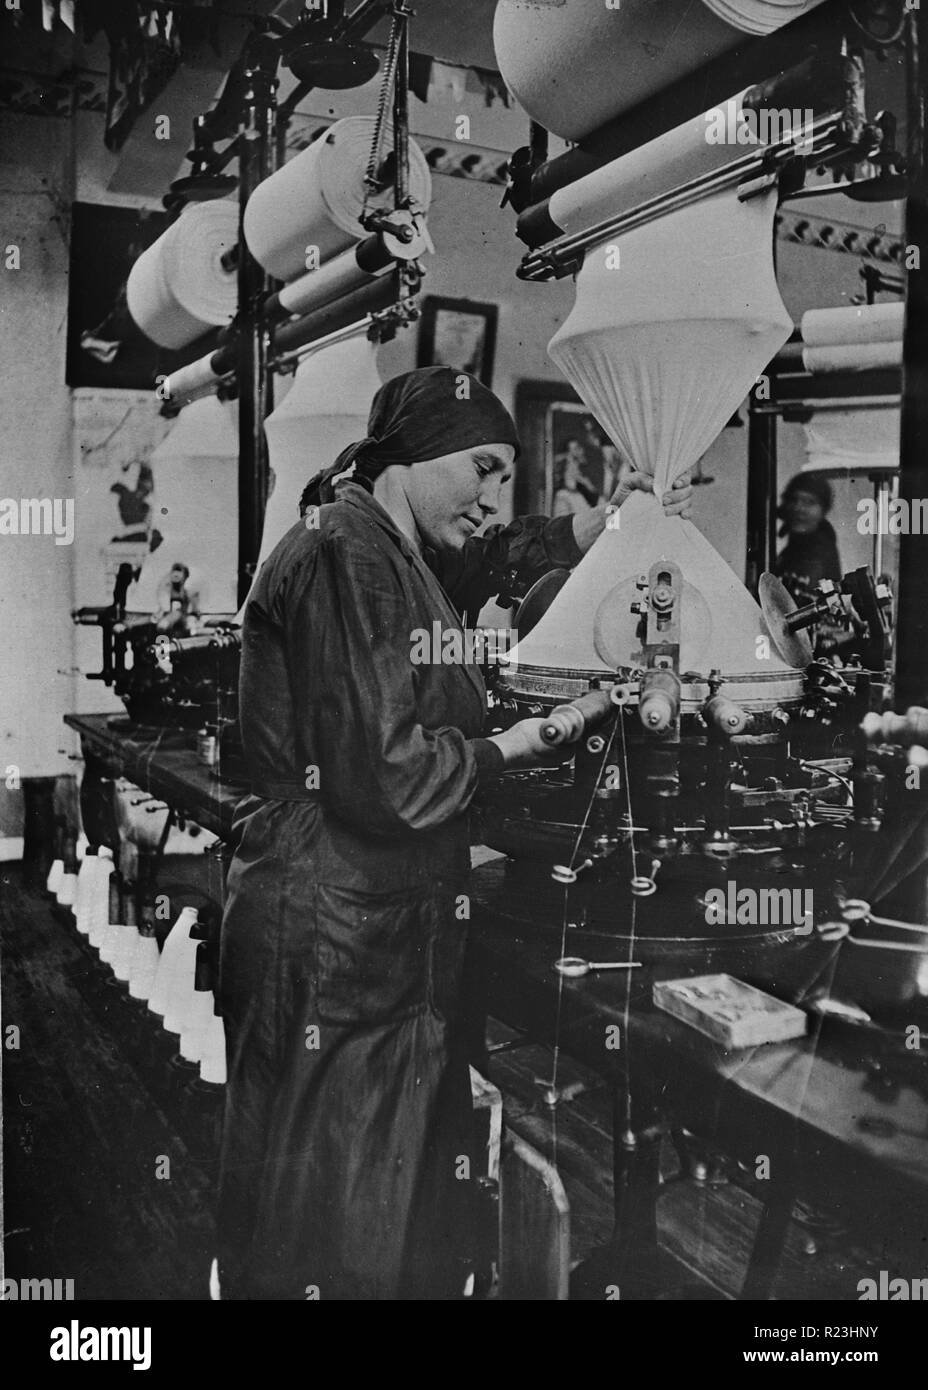 Woman worker in a textile plant in the USSR (Union of Soviet Socialist Republics) Between 1935 and 1945 Stock Photo